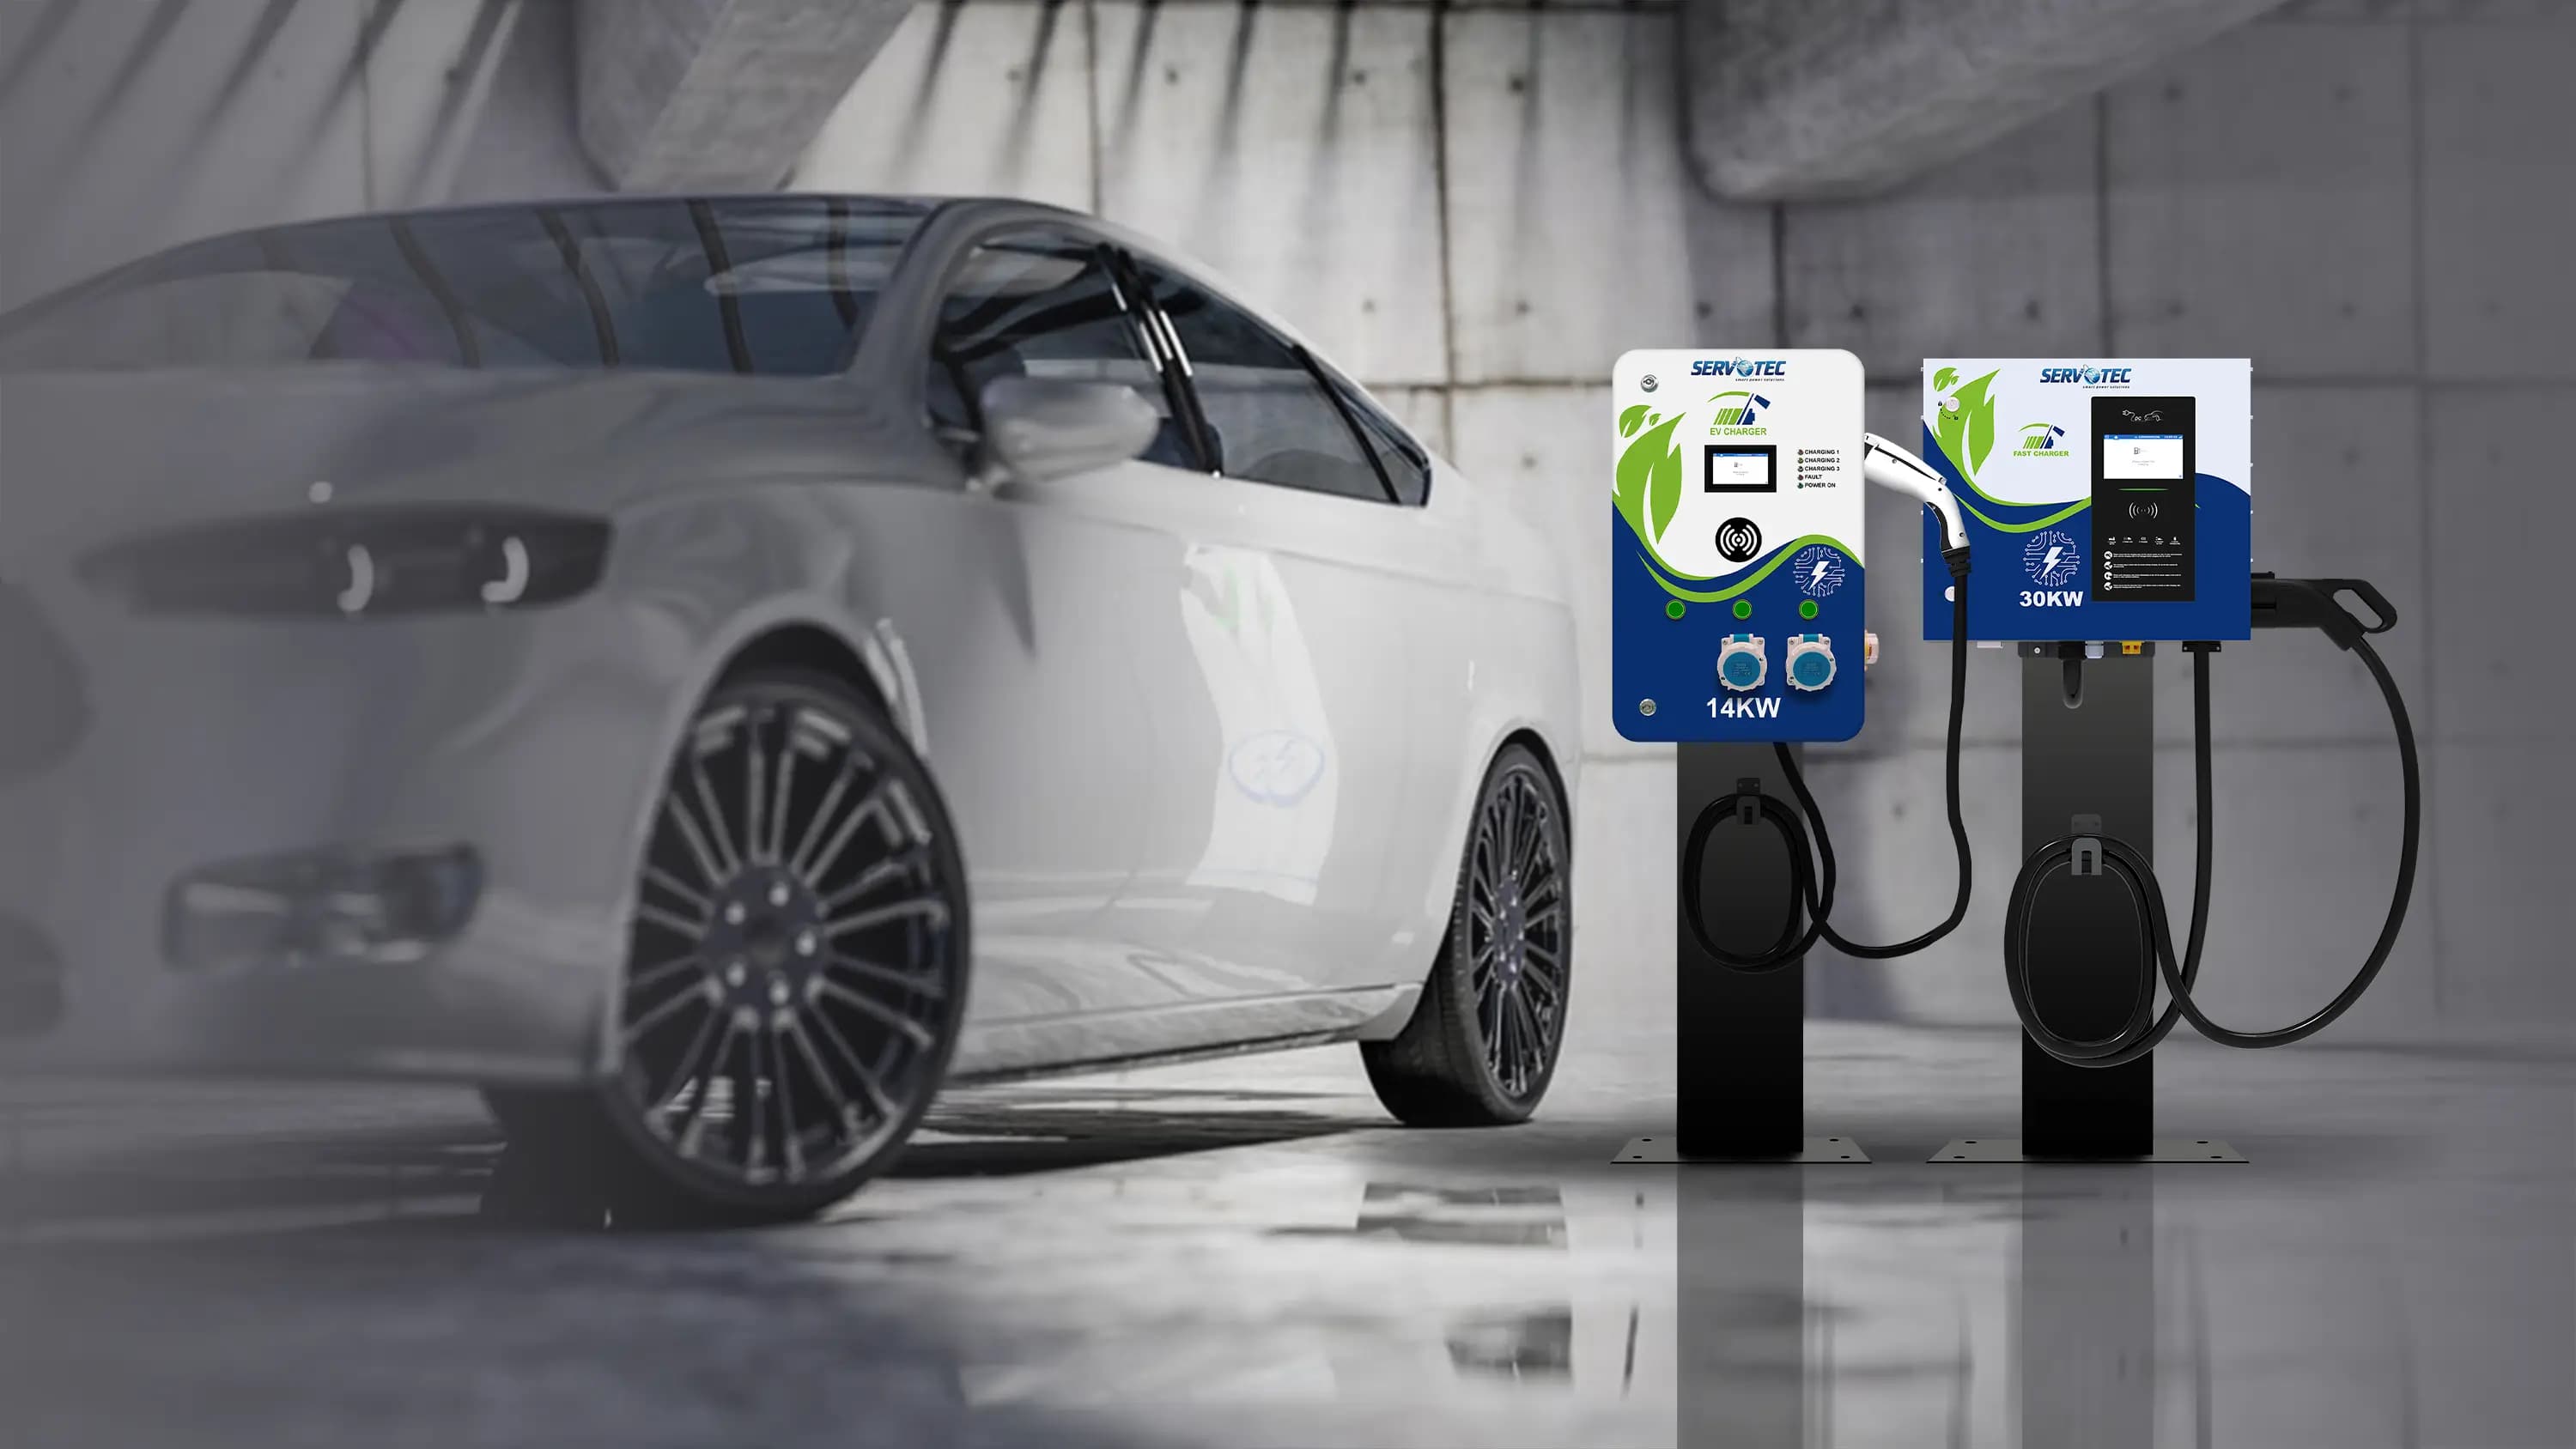 Electric Vehicle Charger - EV Charging for Home